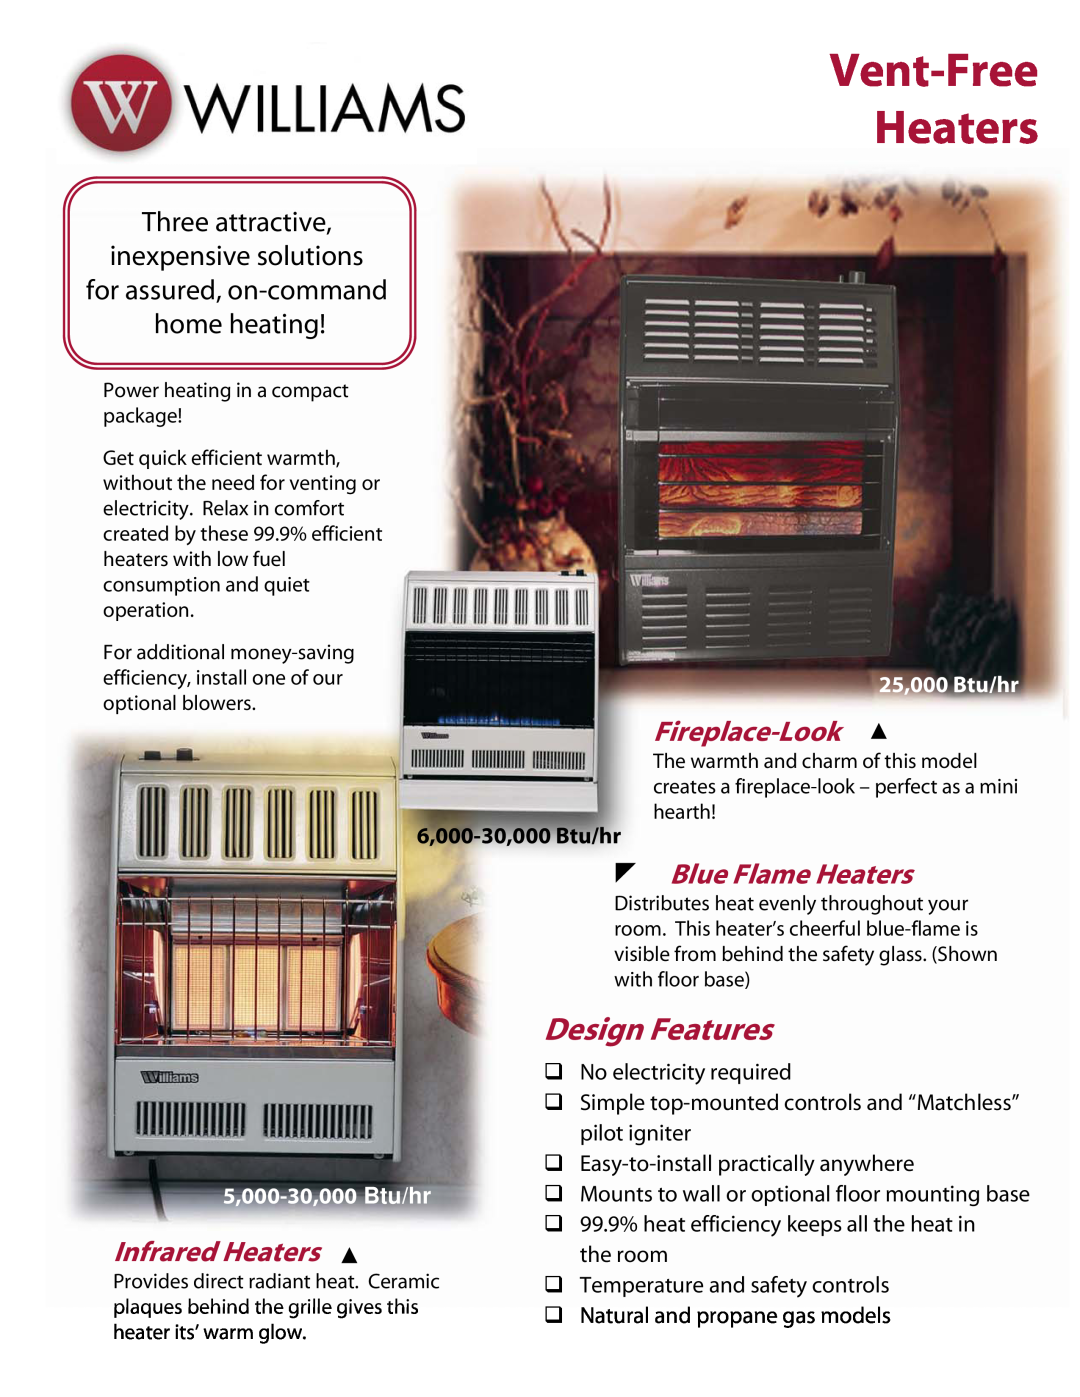 Williams 205, 3056542 manual Vent-Free Heaters, Design Features, Three attractive inexpensive solutions, Fireplace-Look 